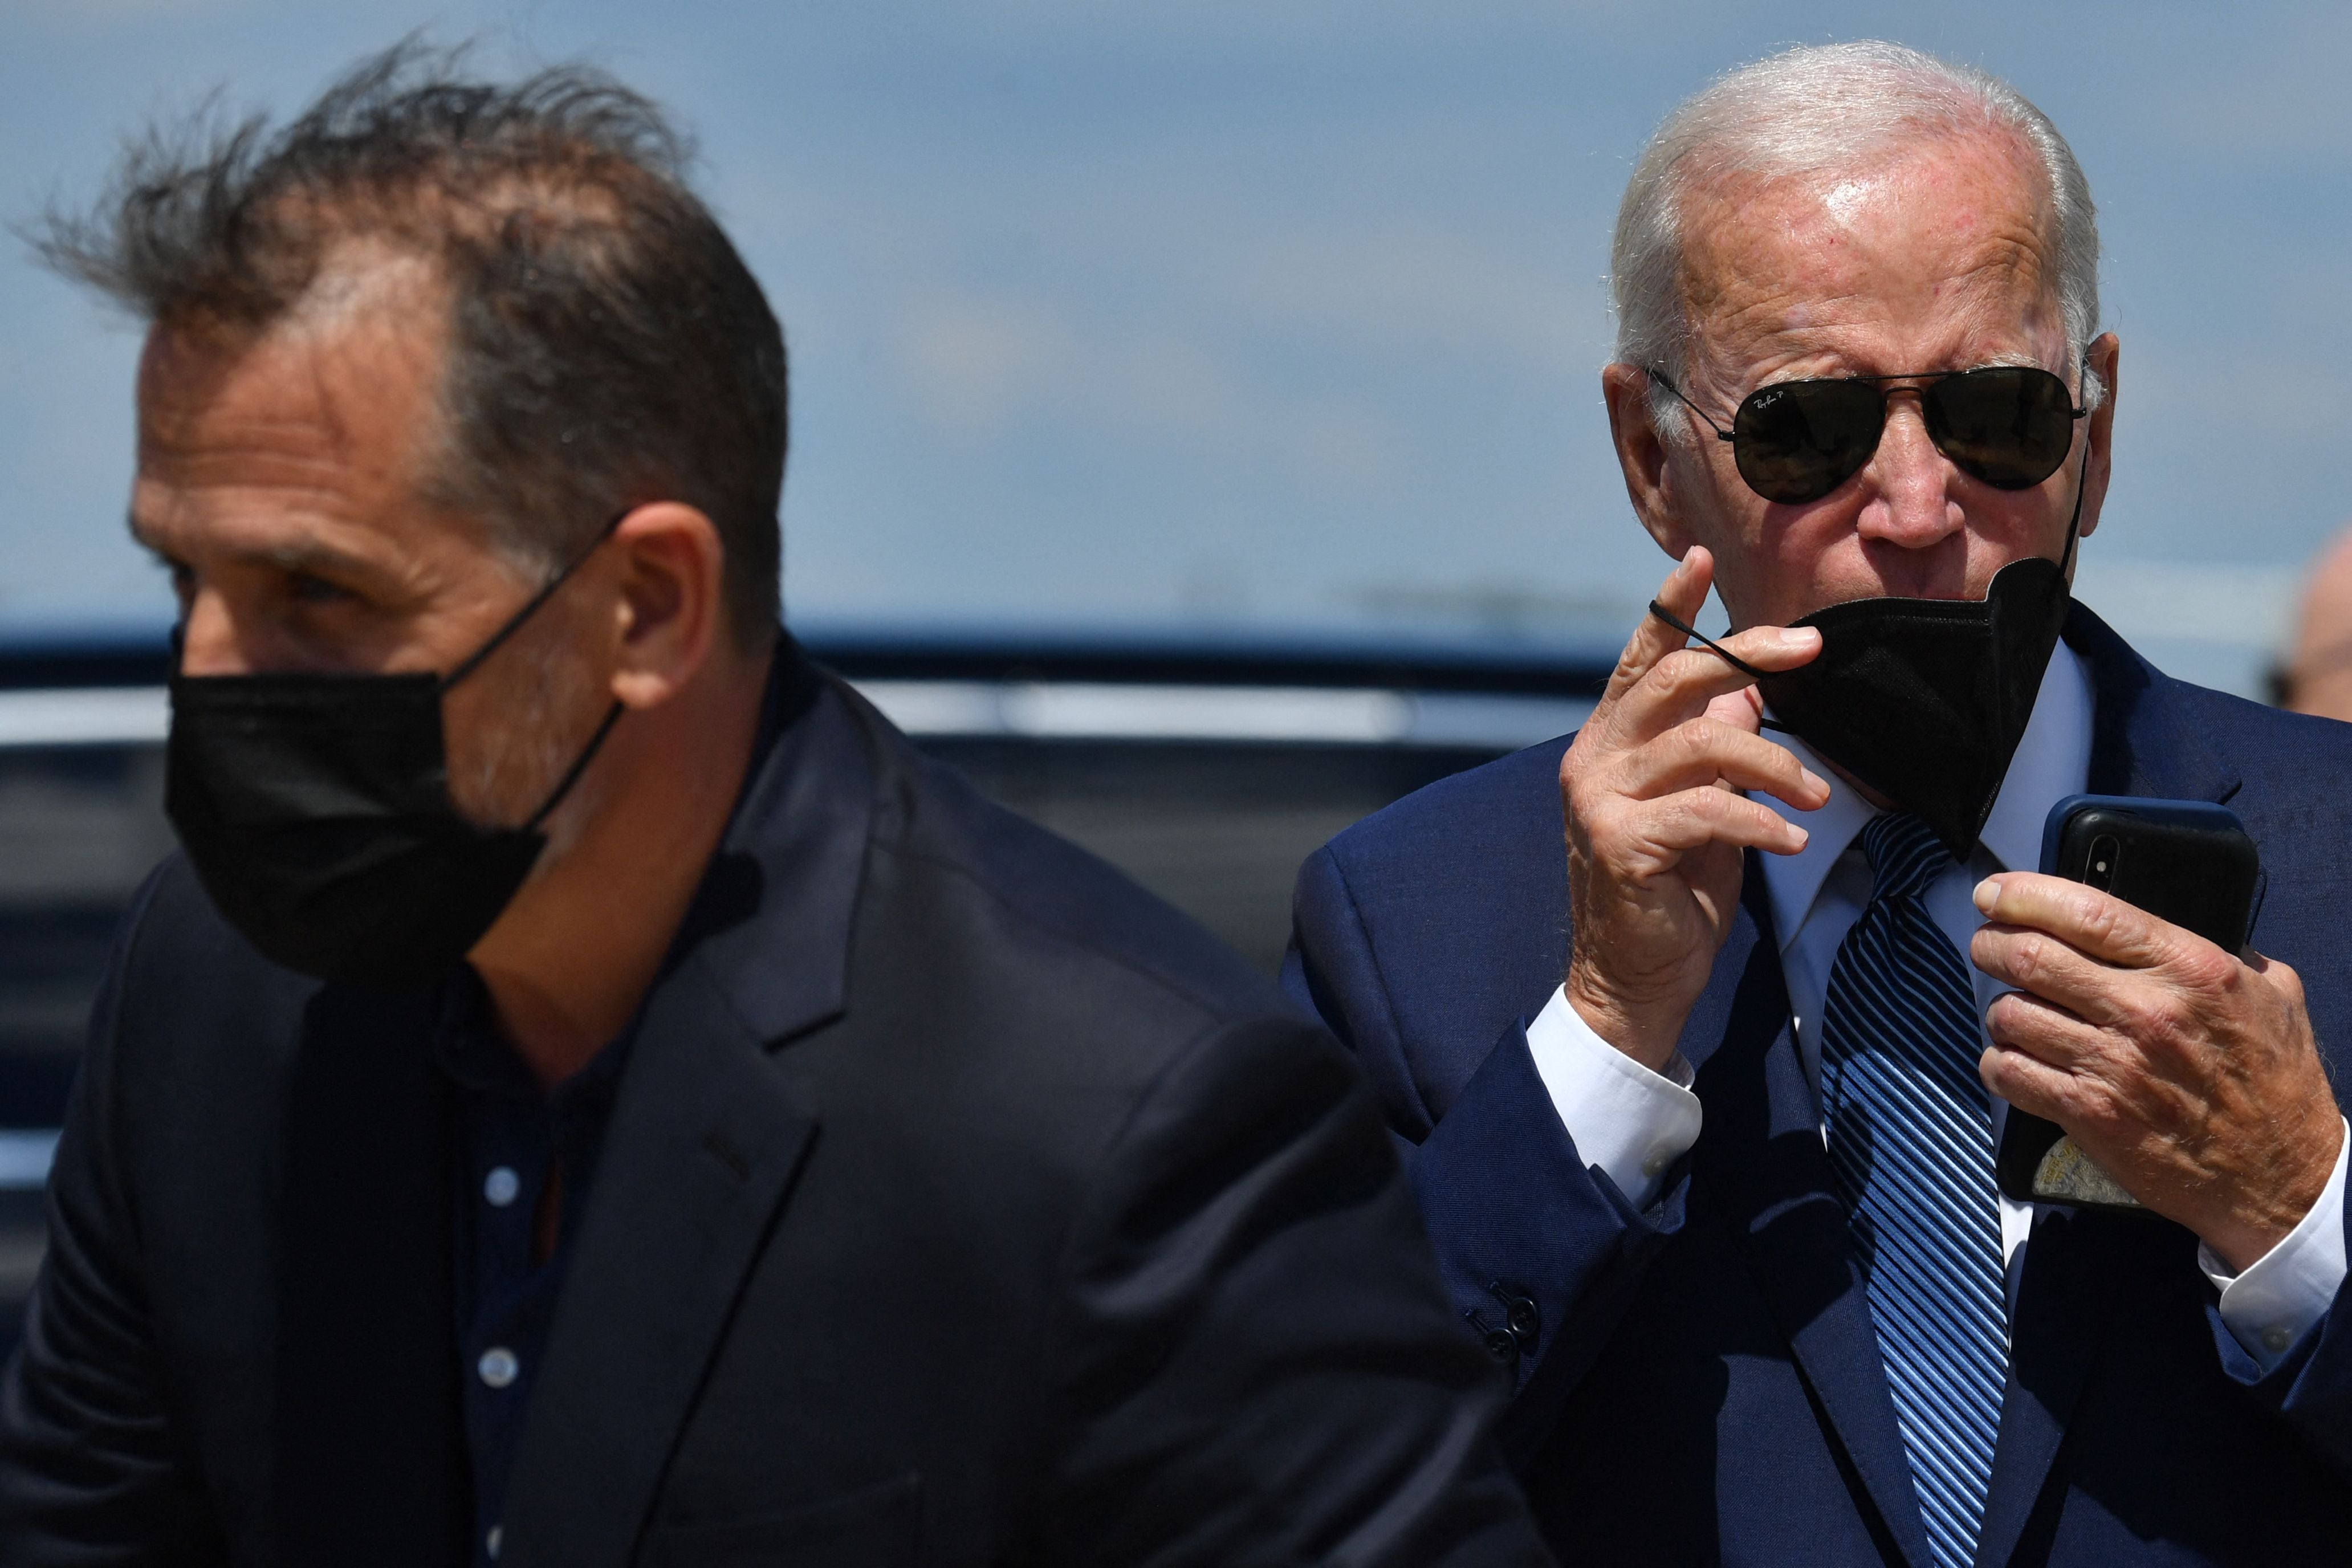 Reports suggest investigators do have enough evidence for possible charge of Joe Biden’s son Hunter (l)